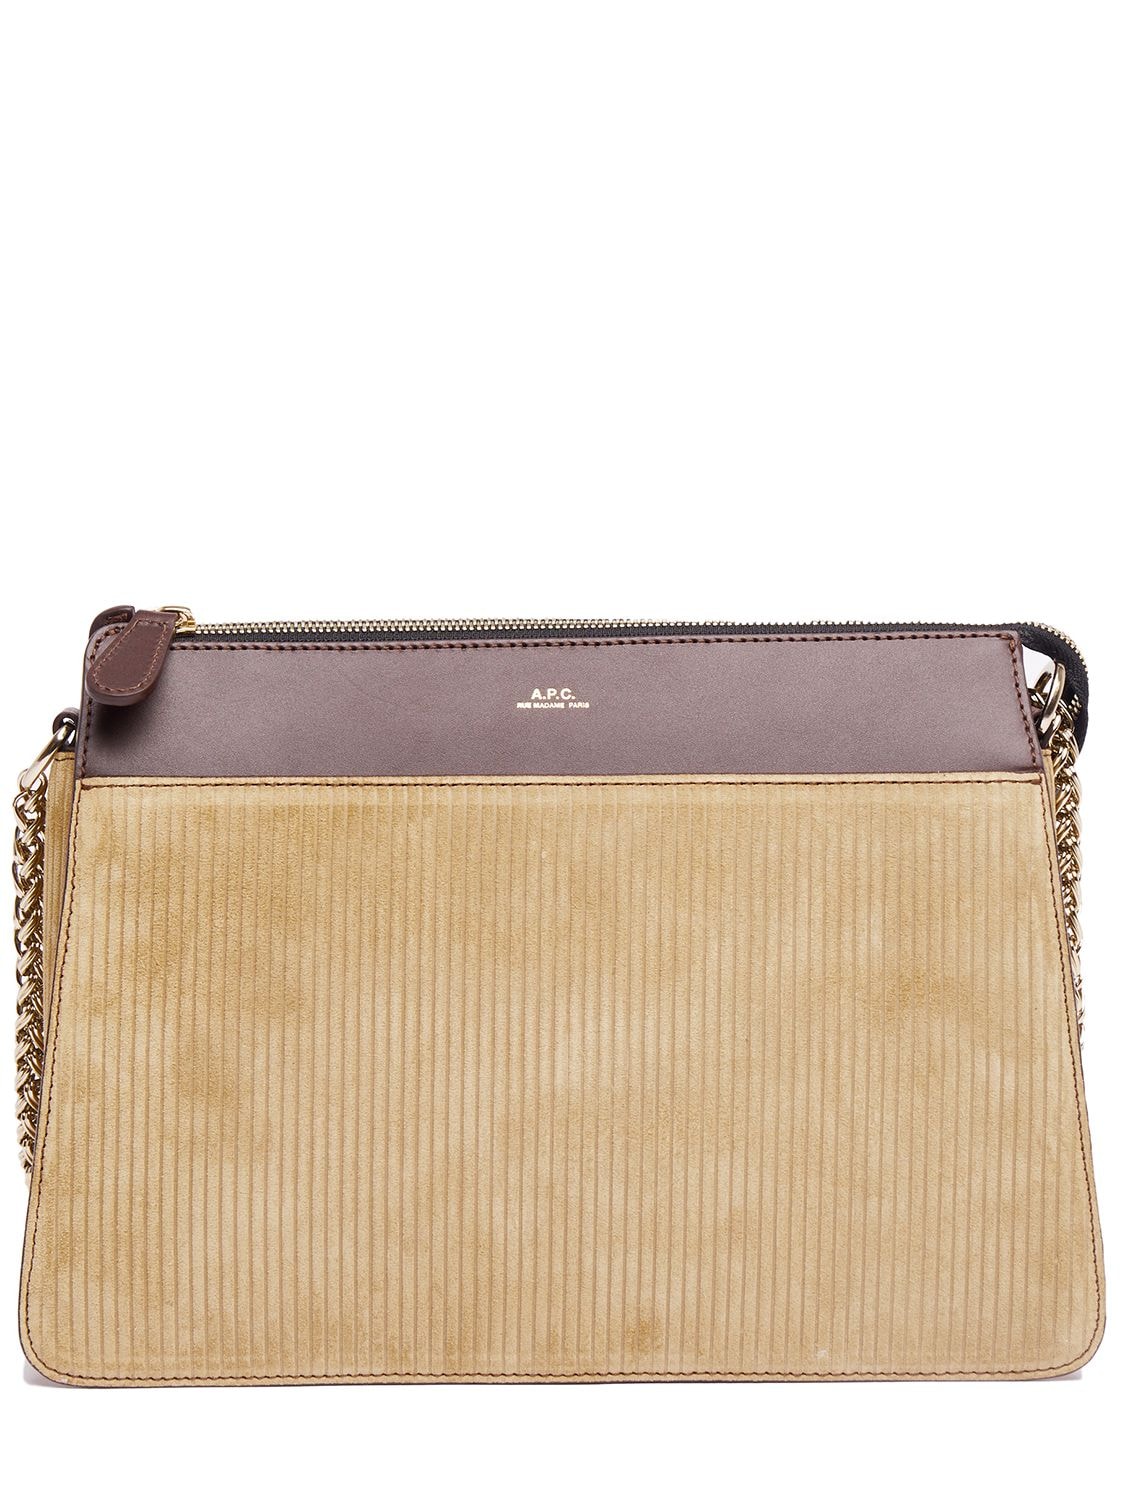 Image of Ella Leather Pouch